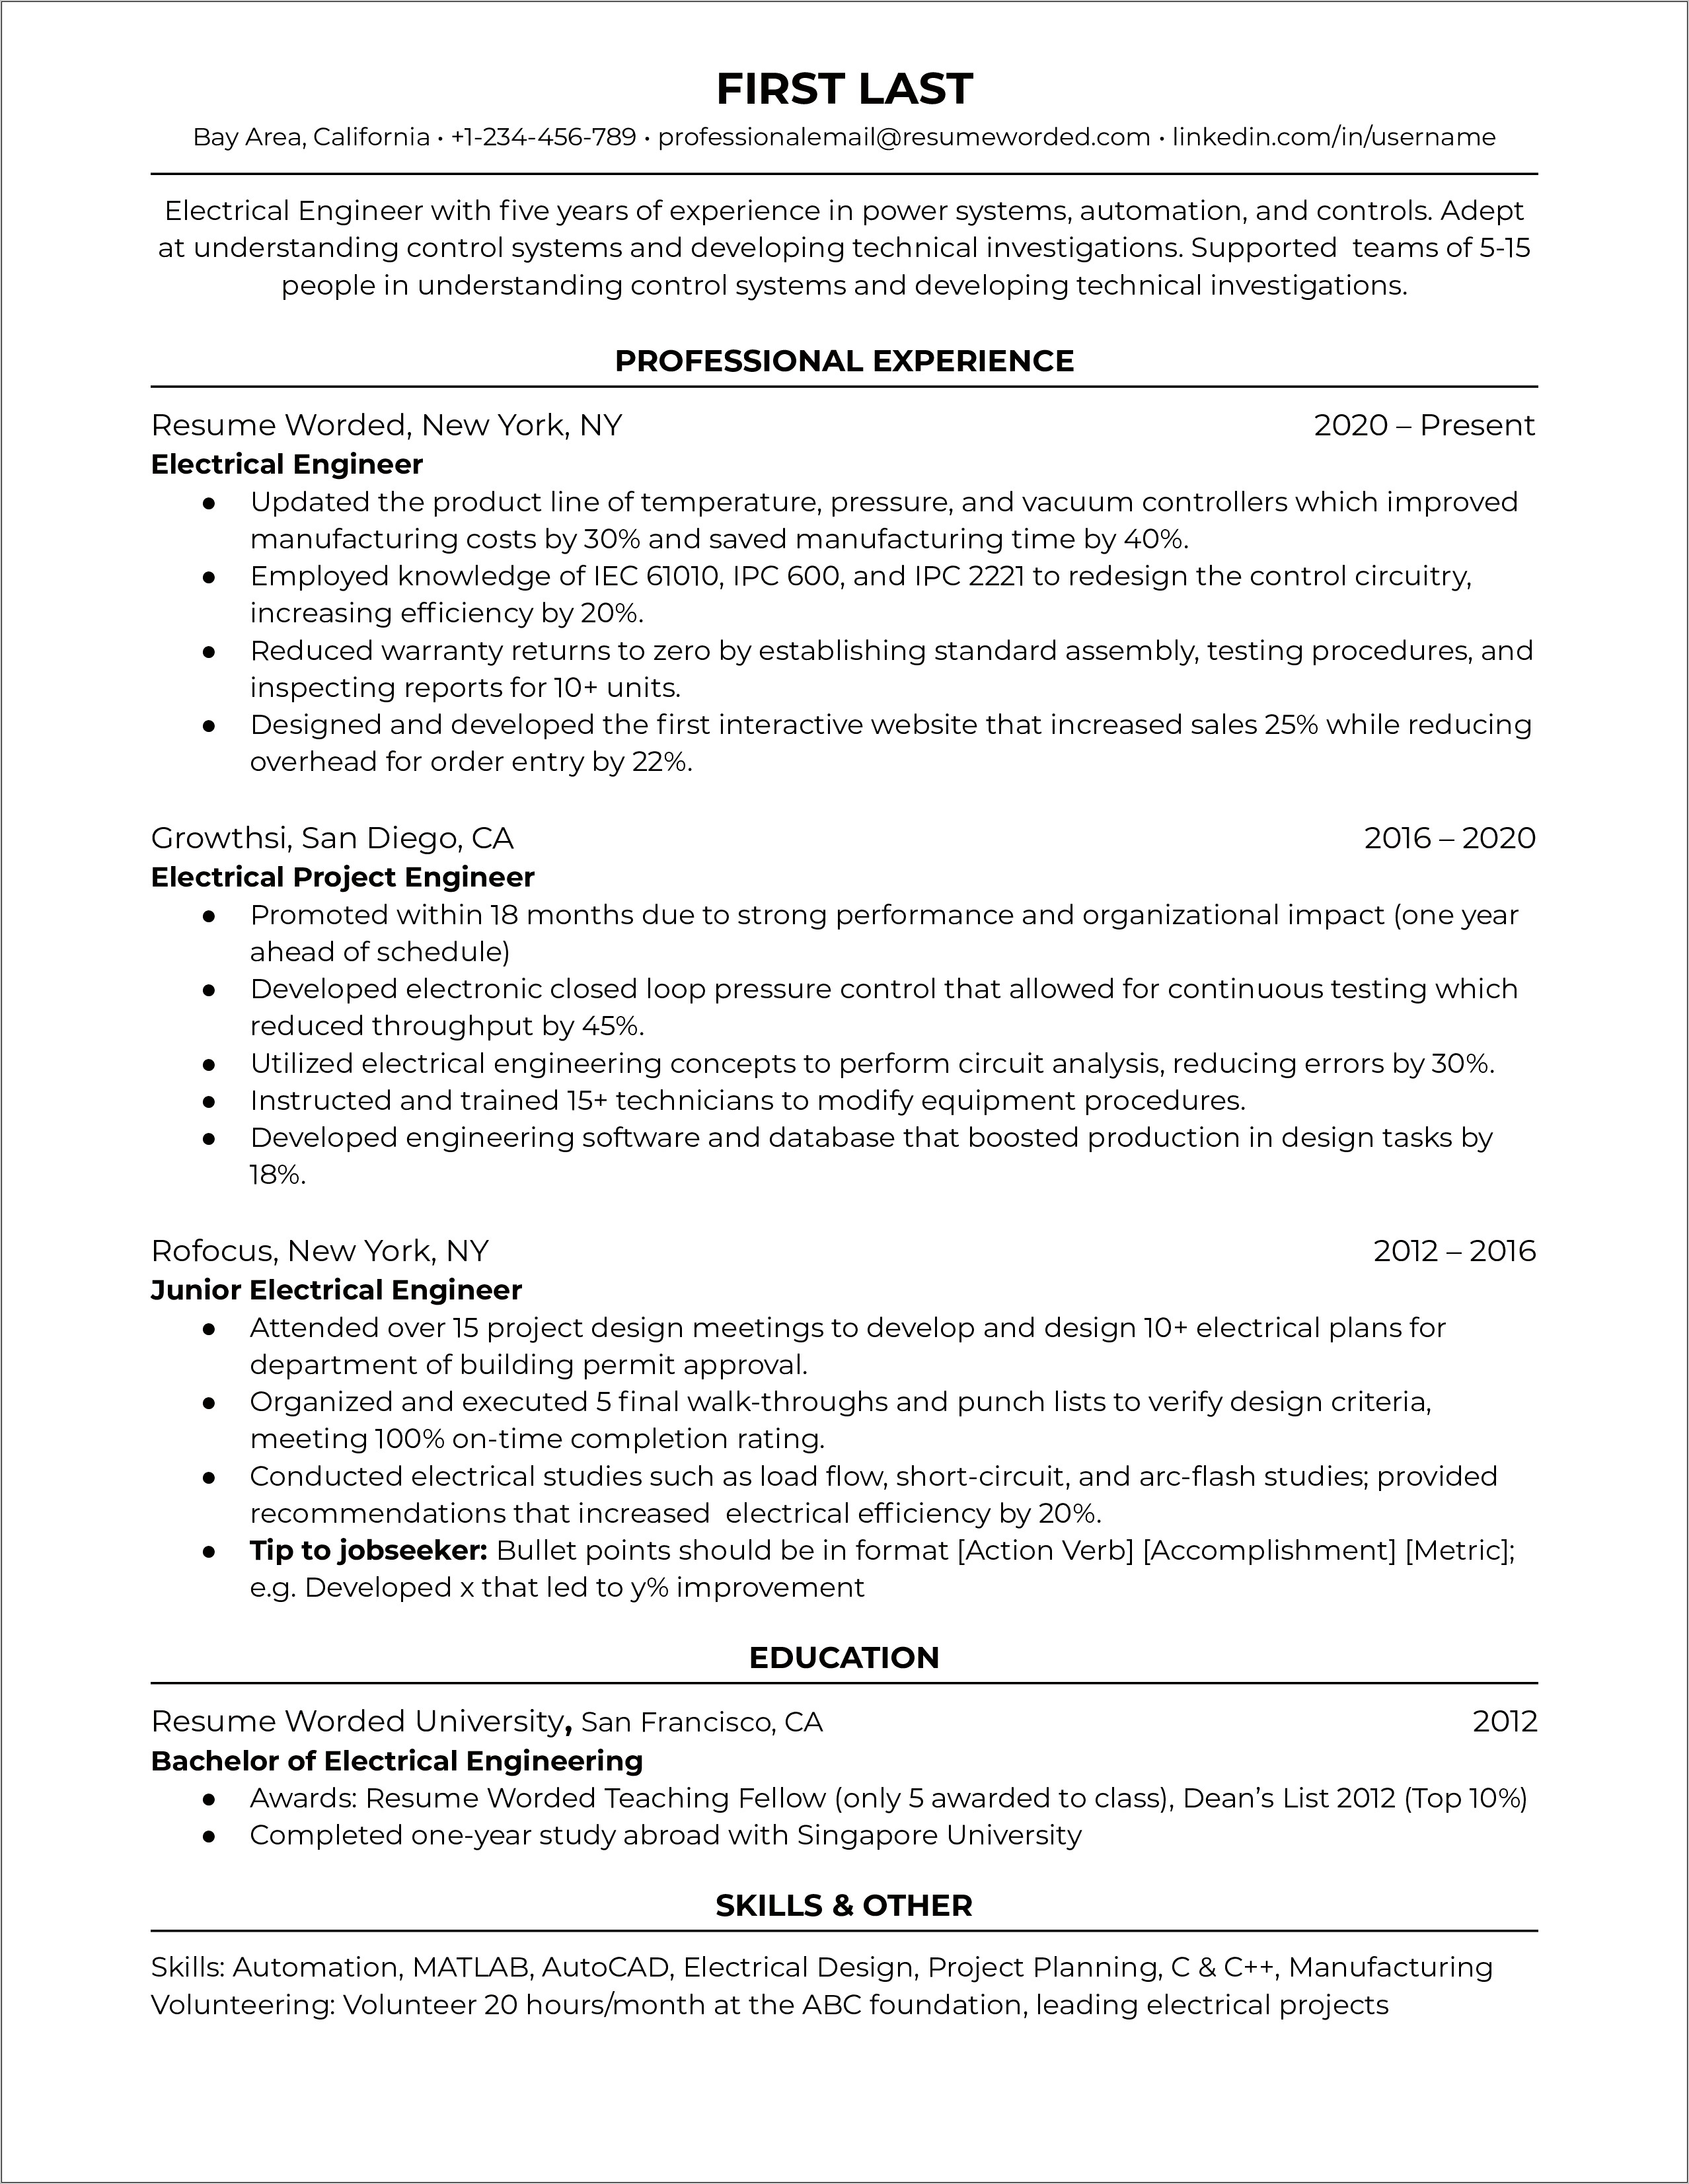 Resume Objective Examples For Electrician